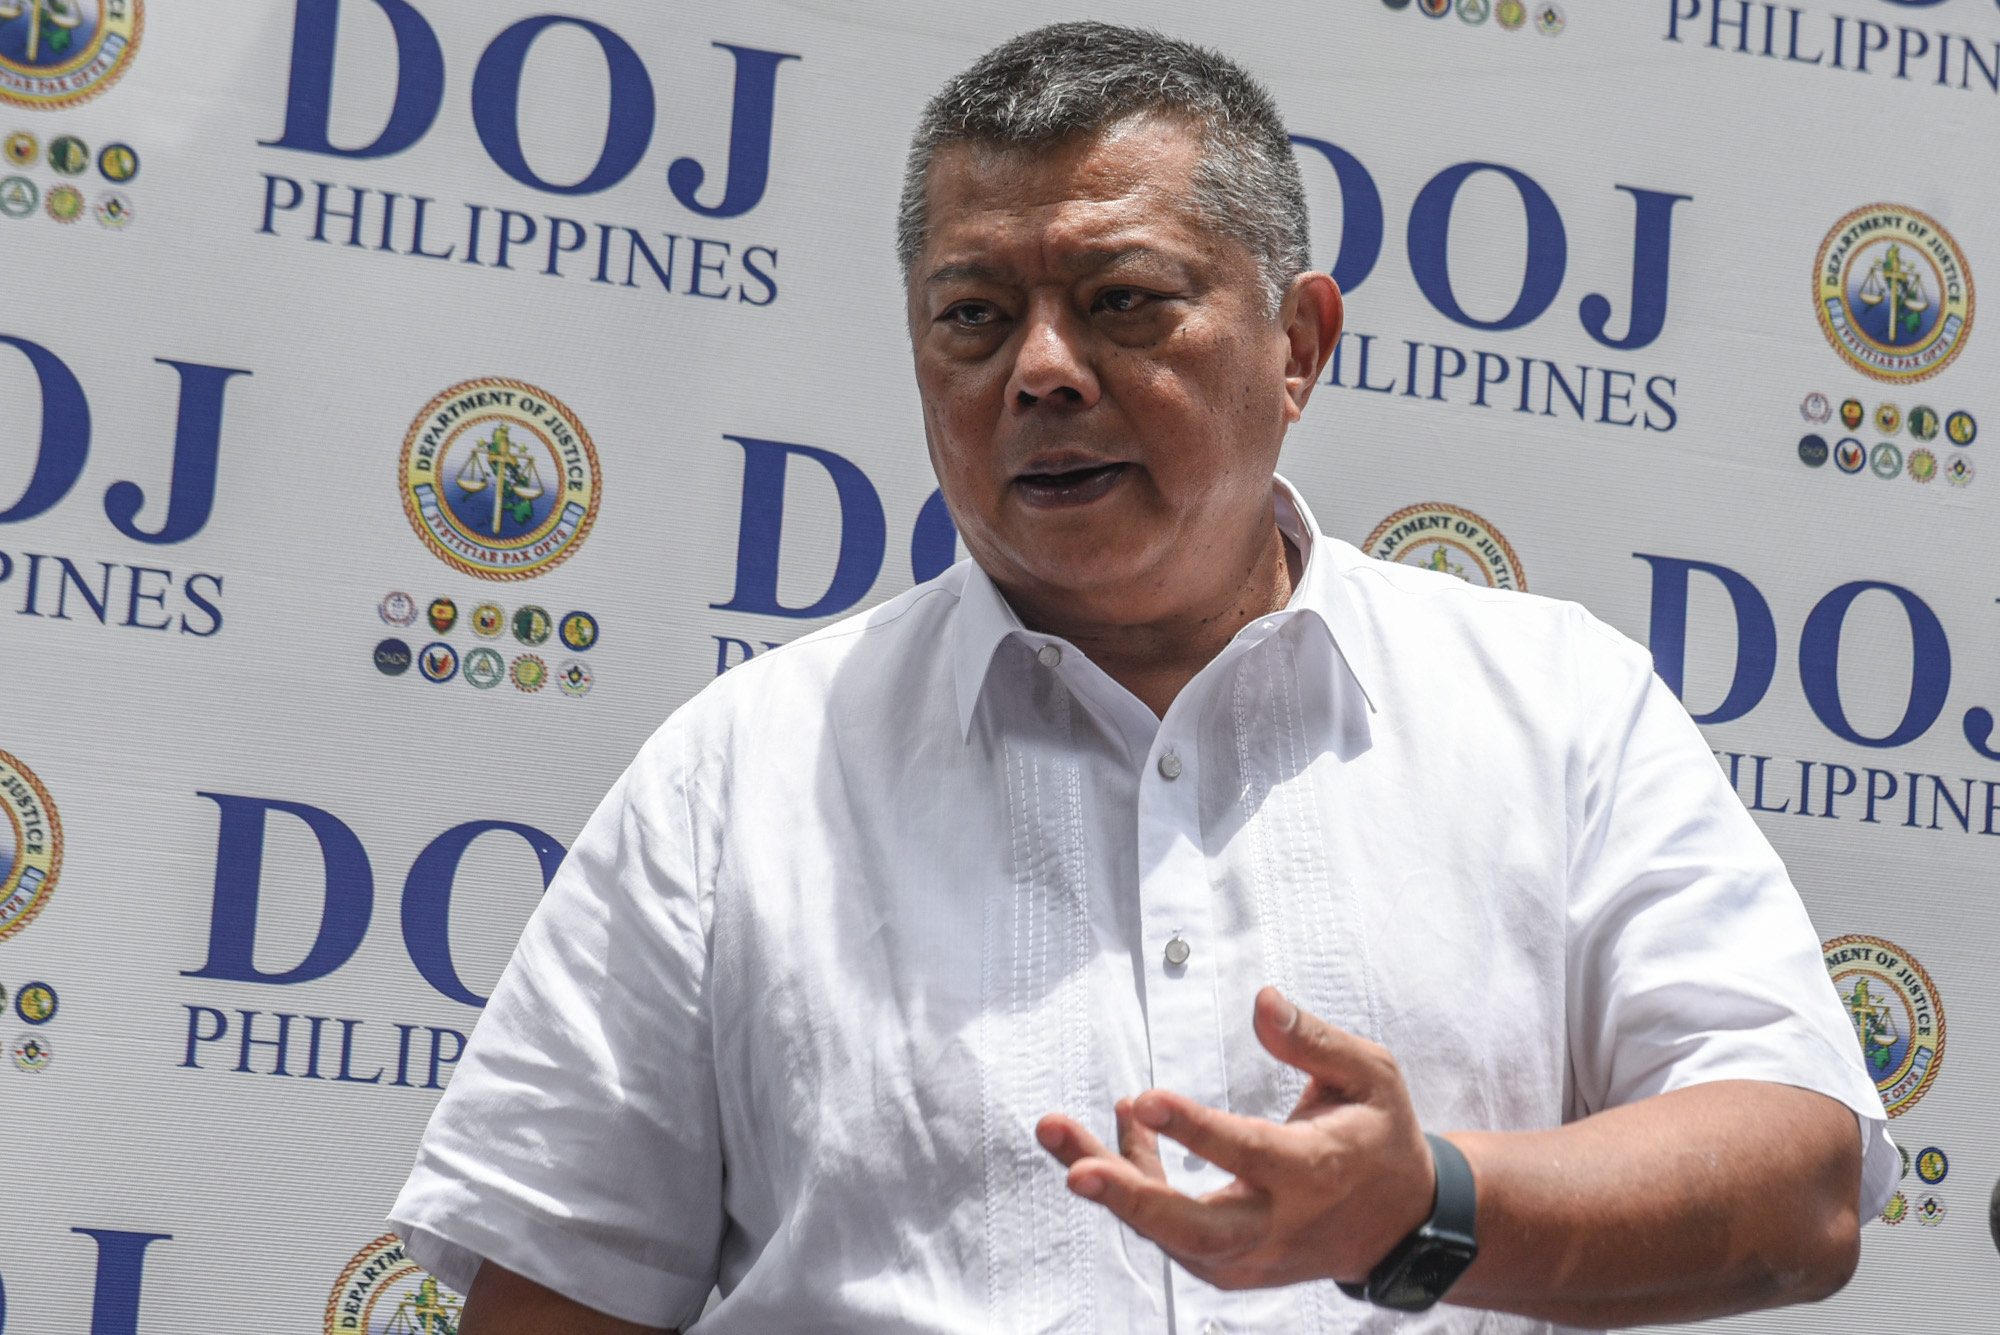 Remulla hits PNP’s anti-trafficking raid: ‘No grounds to arrest people’